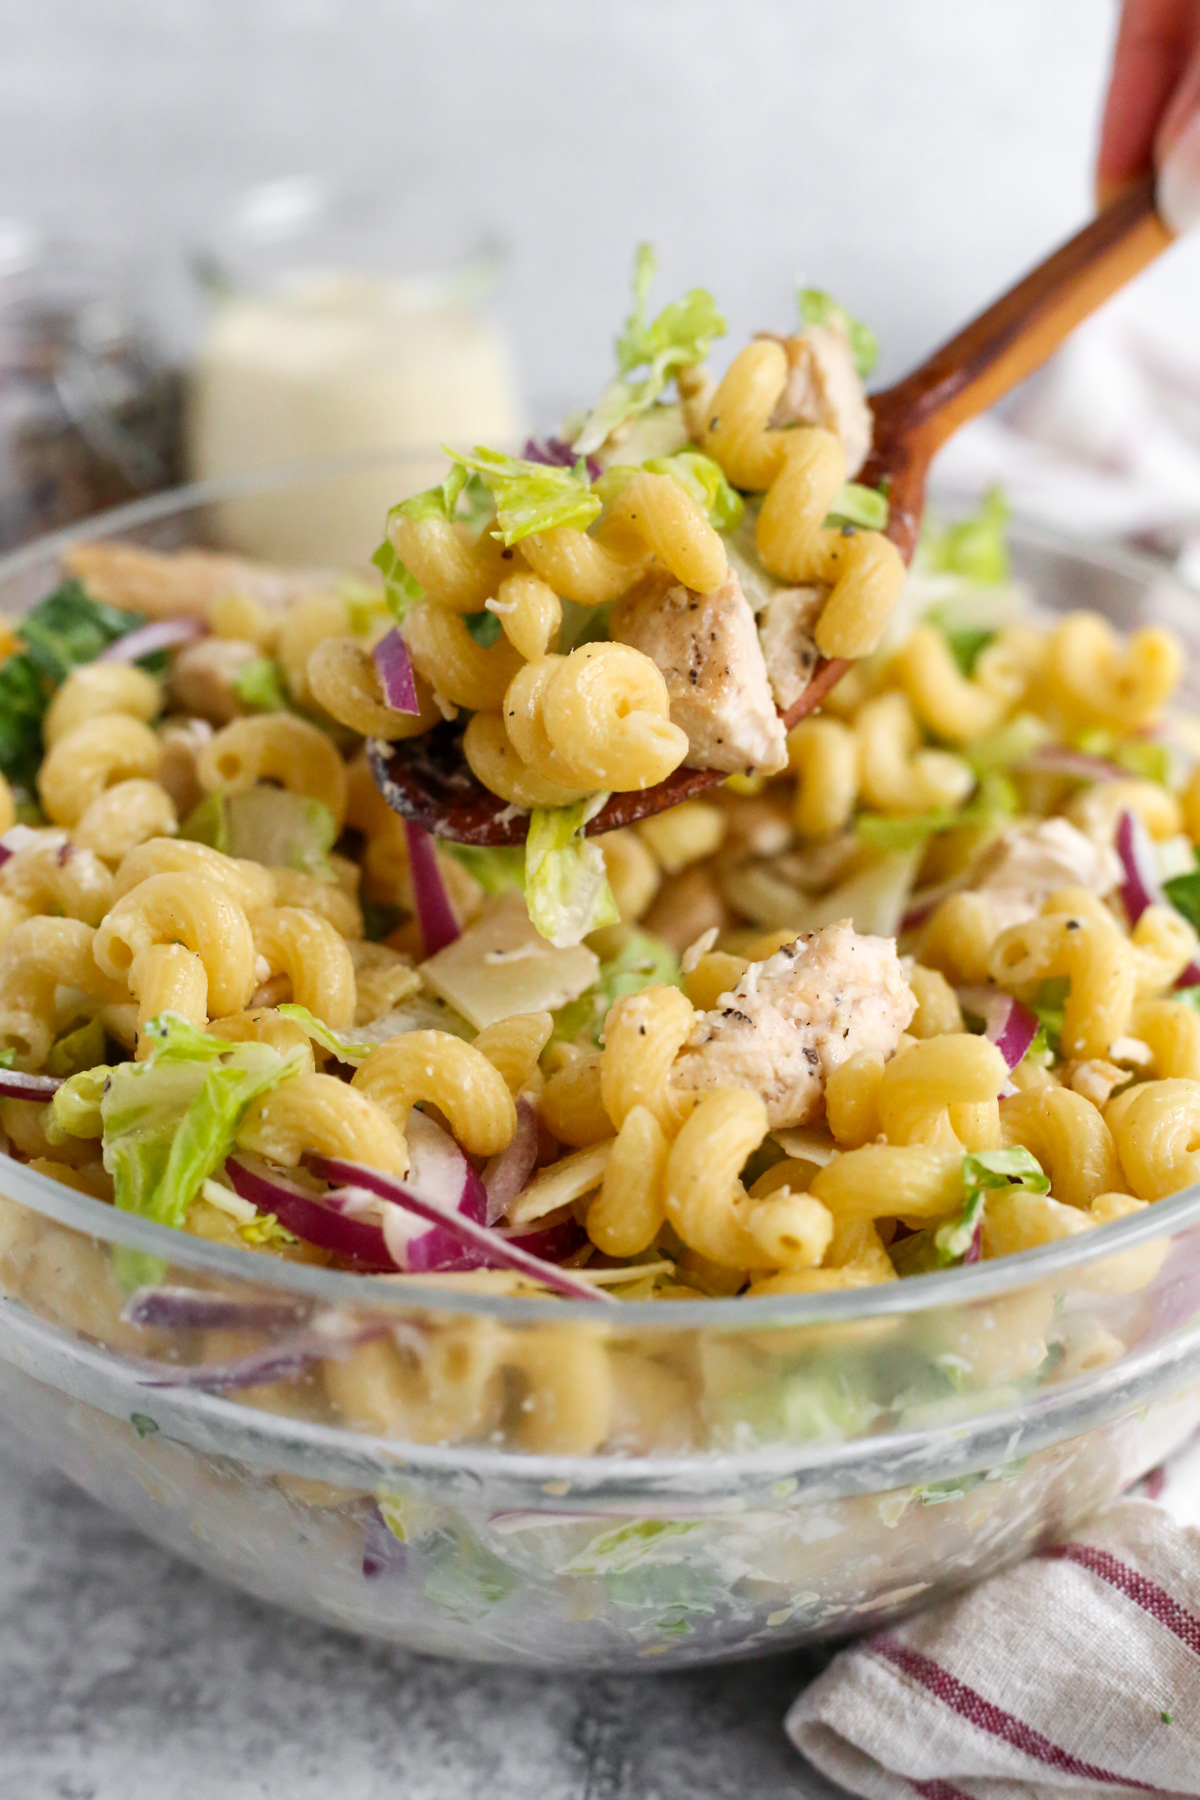 A woman's hand holds a wooden serving spoon piled high with creamy chicken caesar pasta salad. The pasta is cooked al dente and the seasoned chicken looks juicy and tender. The crispy romaine lettuce and sliced red onions are mixed evenly throughout the pasta salad